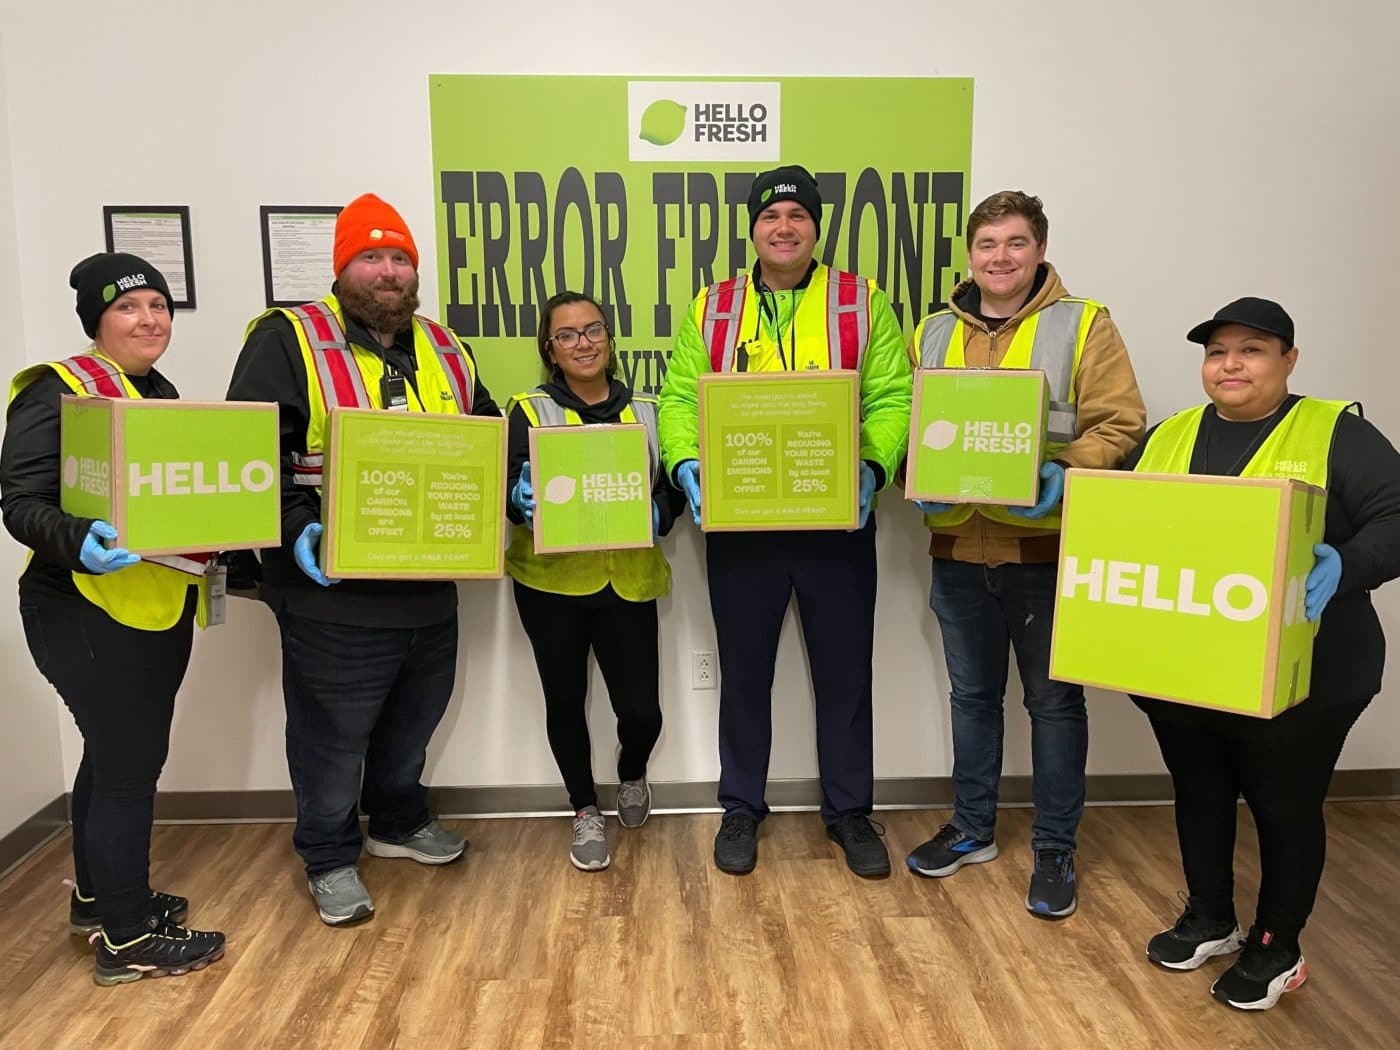 Six men and women standing holding HelloFresh food boxes